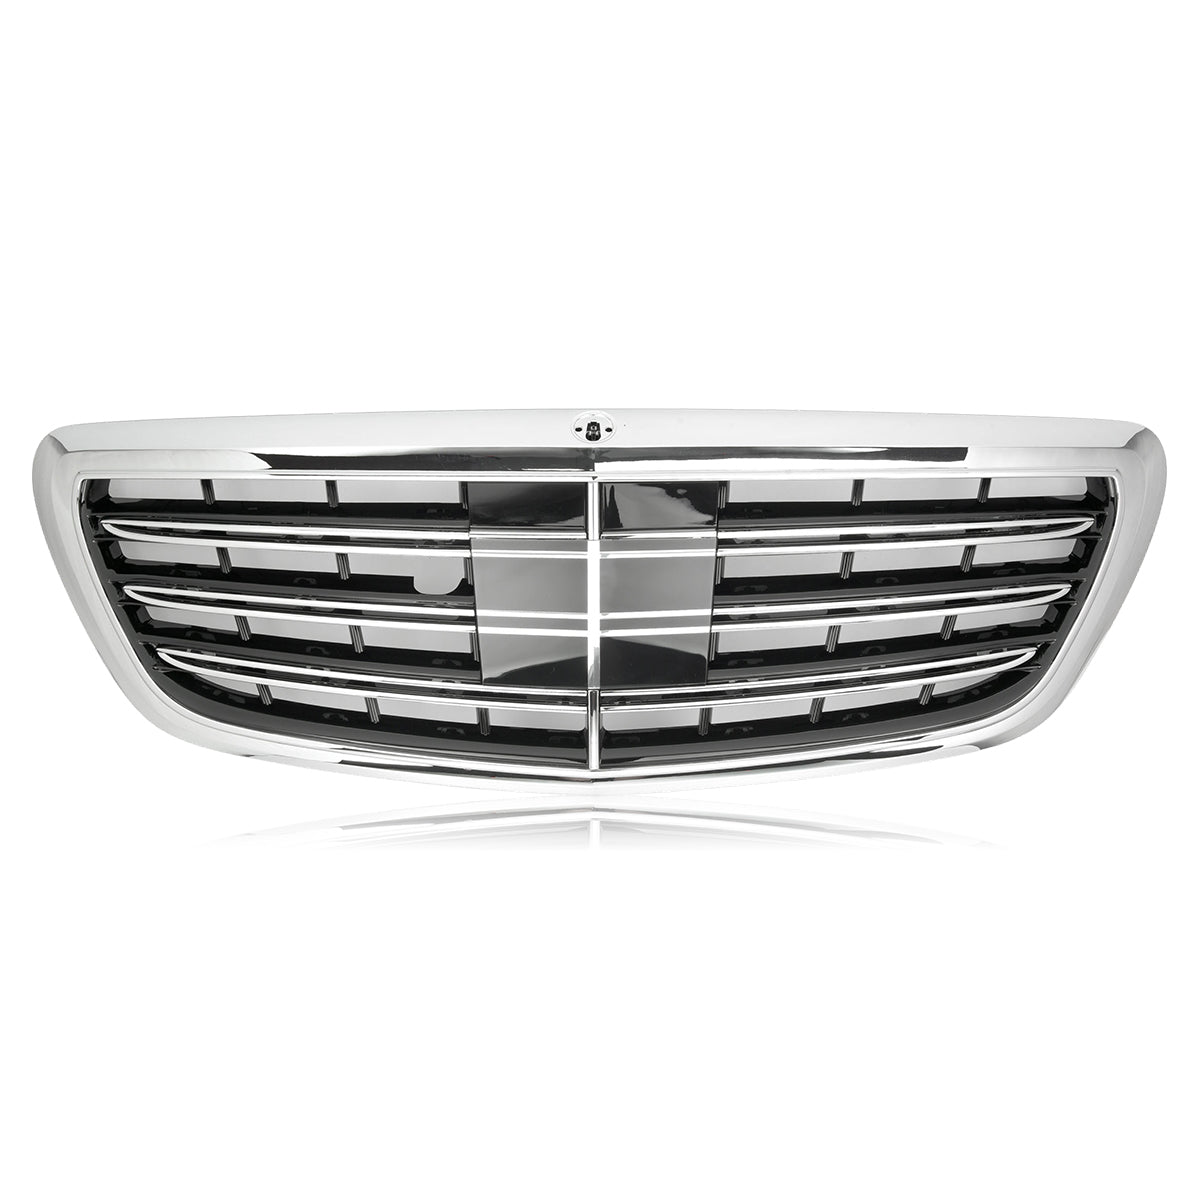 S63/S65 GRILLE FOR S-CLASS W222 2014-2018